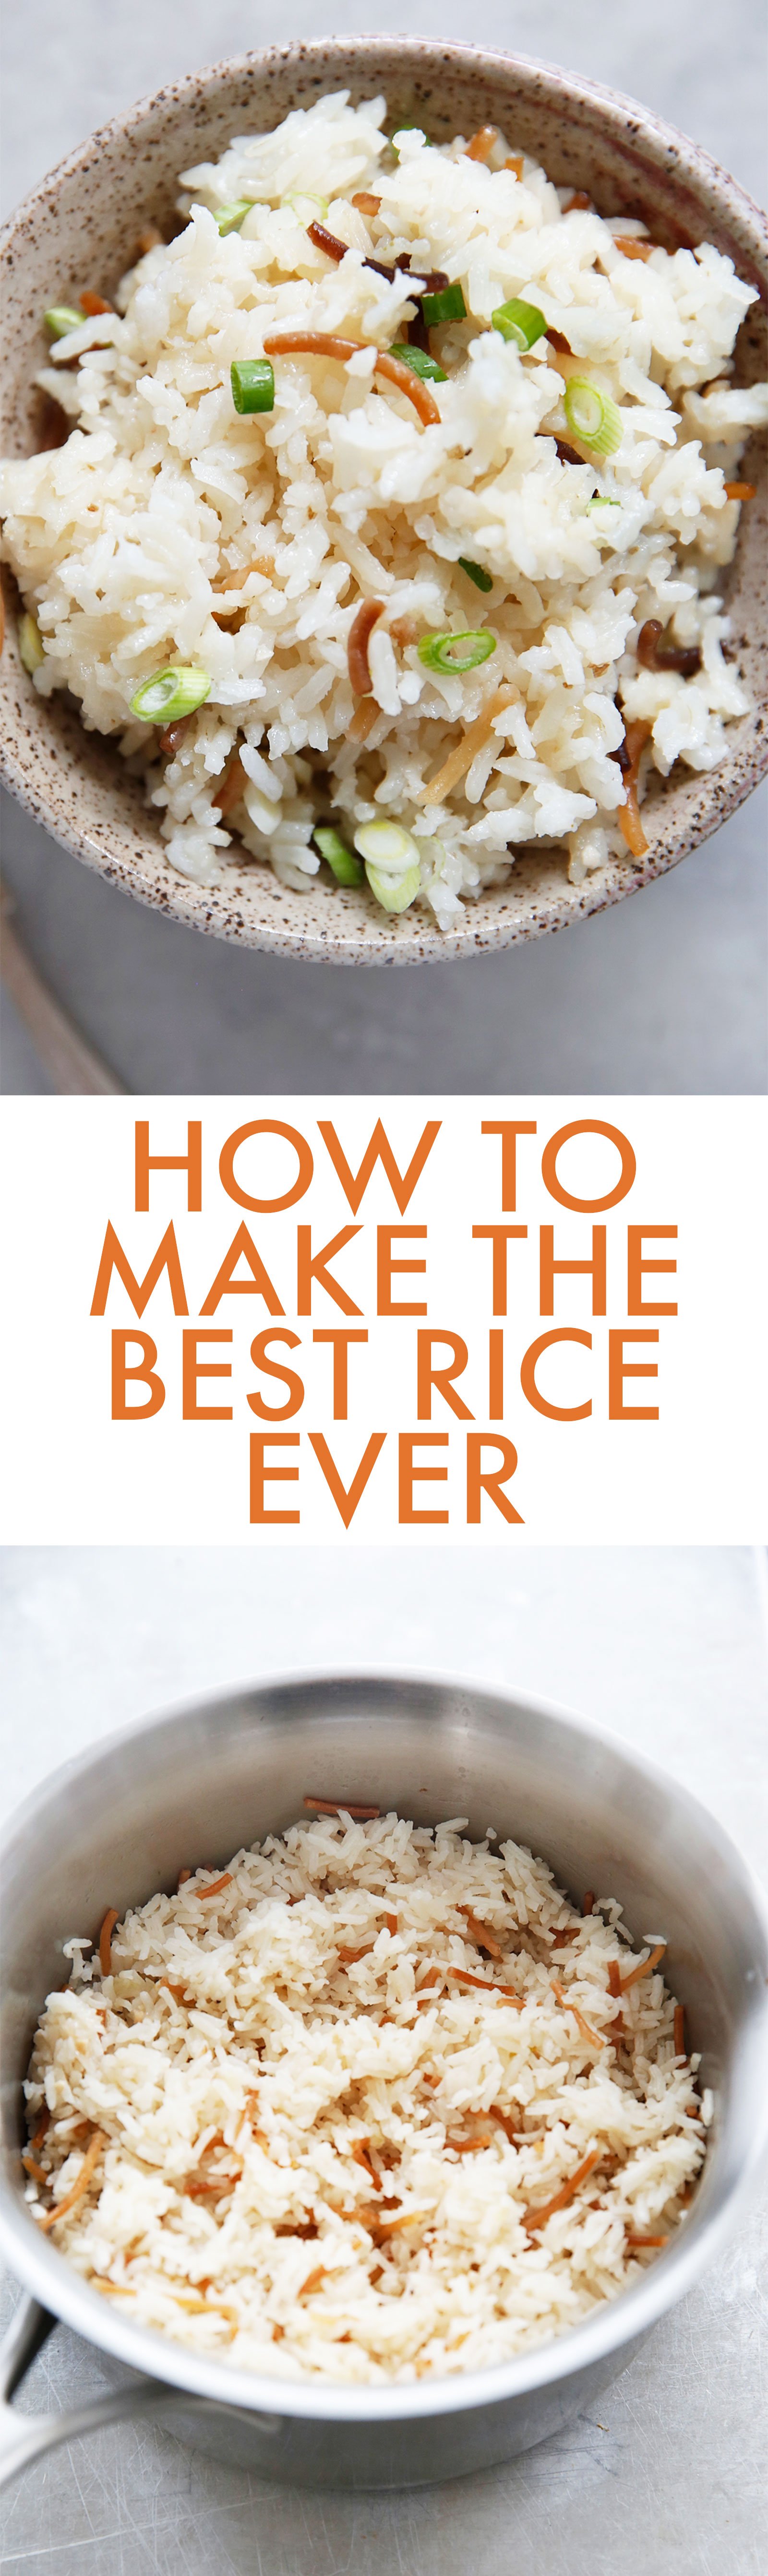 How to Make the Best Rice Ever (Stove Top and Instant Pot ...